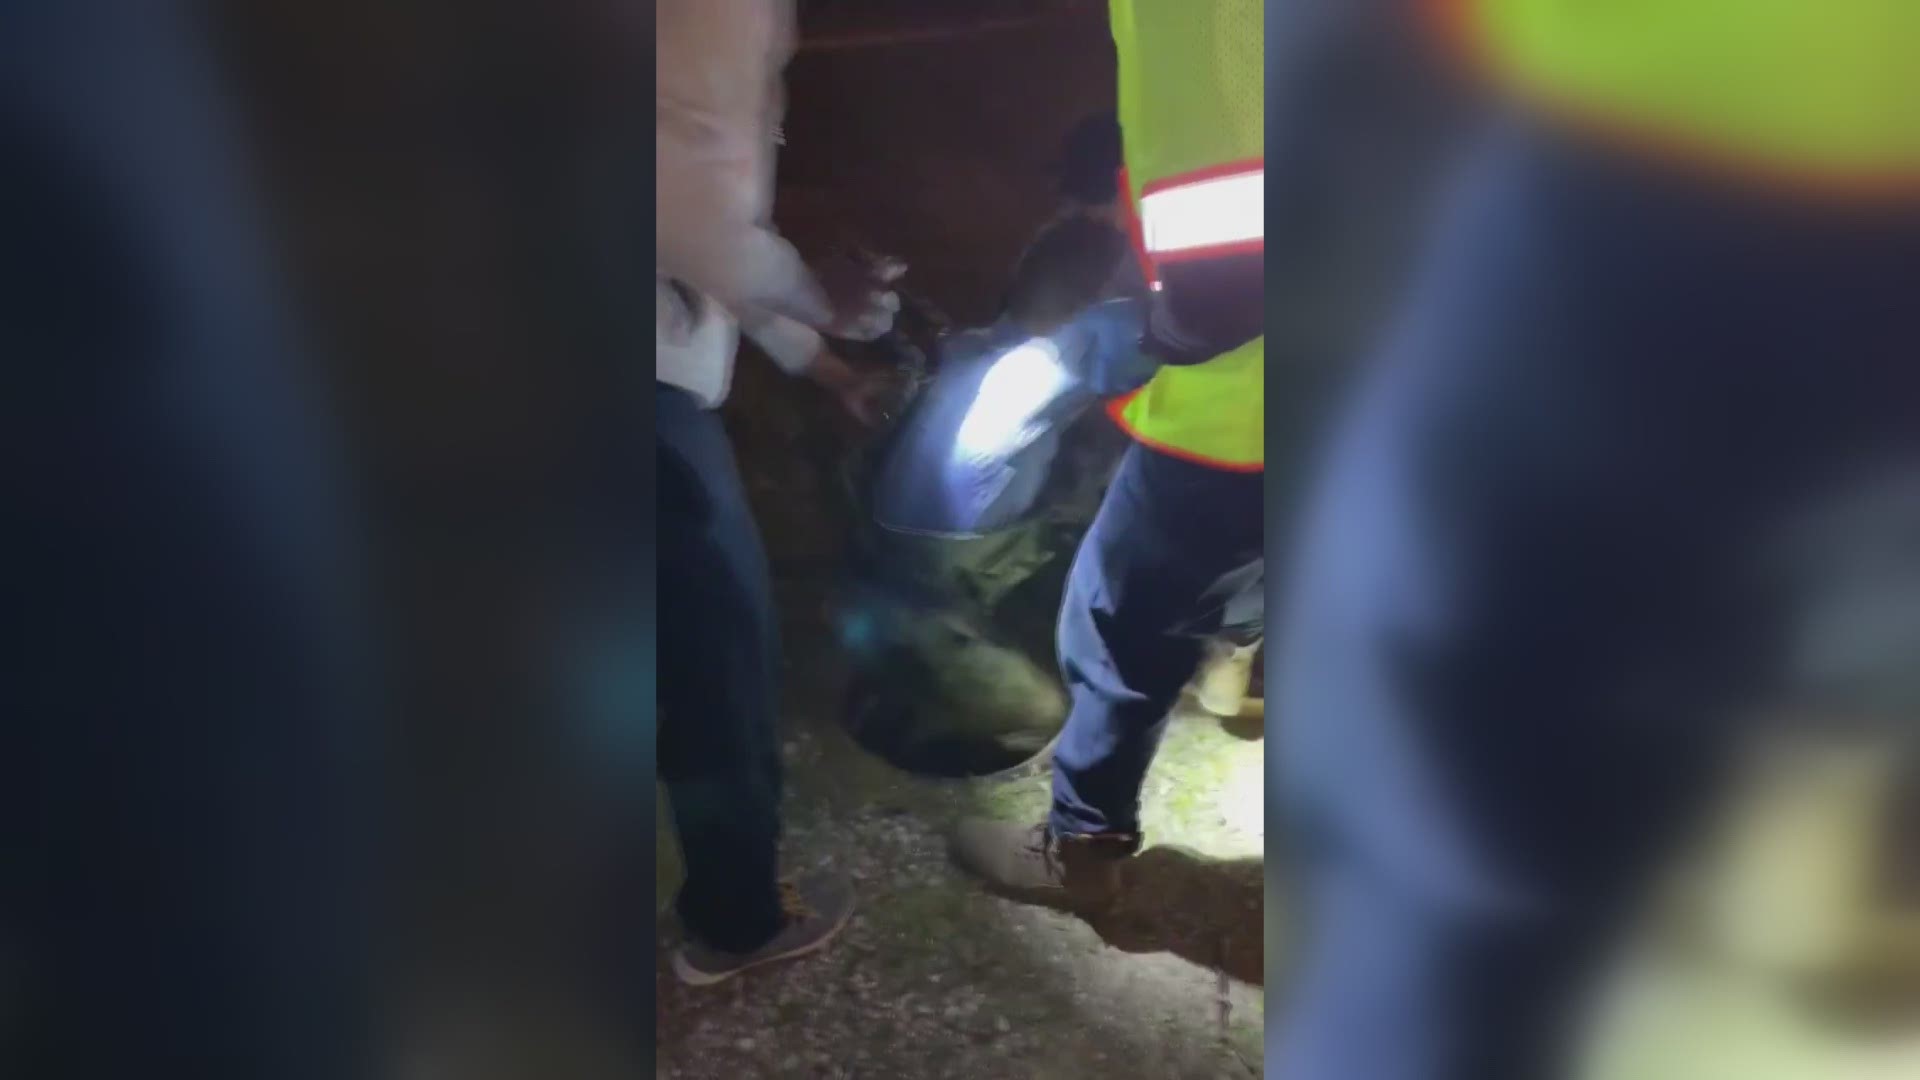 After two hours of searching at least a half mile’s worth of manholes, HRA officers retrieved Prince from the sewer and reunited him with his owners.